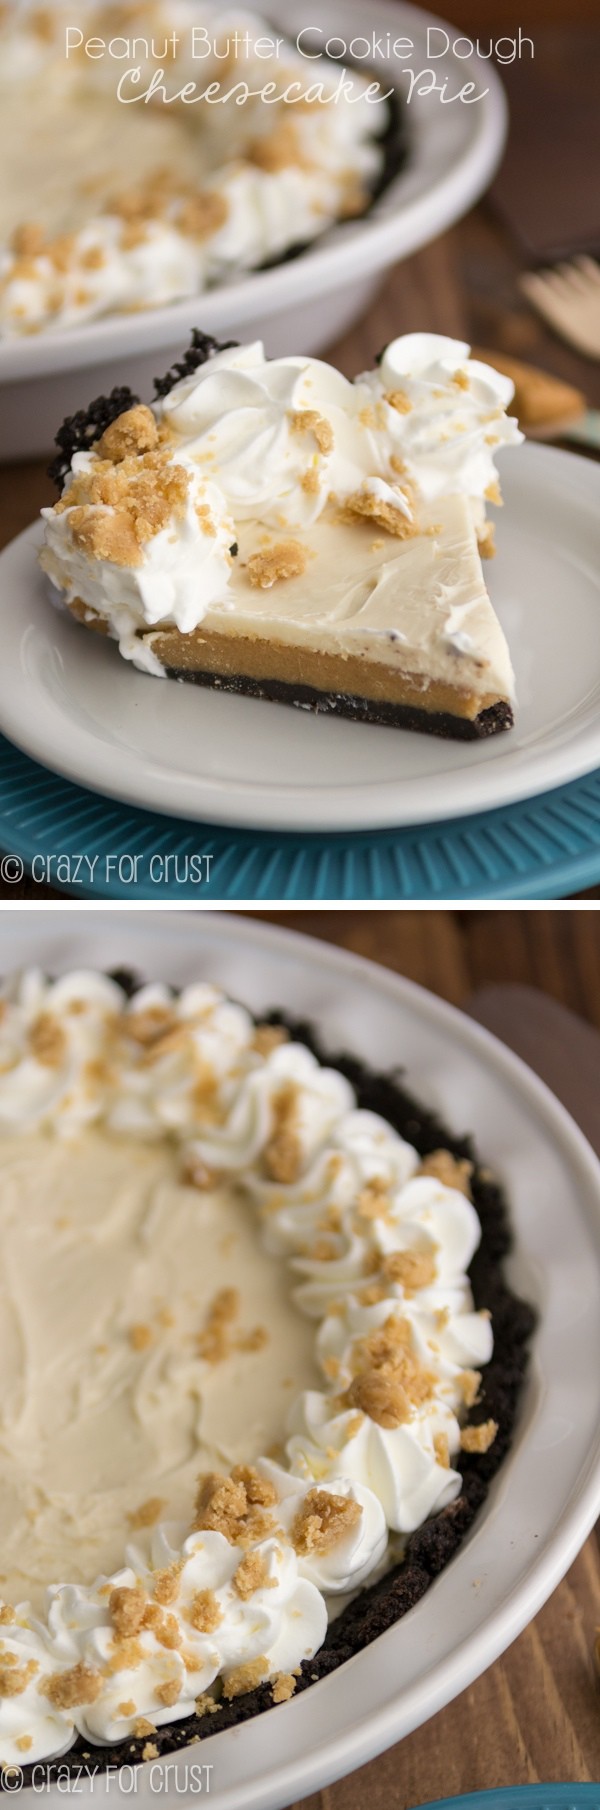 Two photo collage of Peanut Butter Cookie Dough Cheesecake Pie 